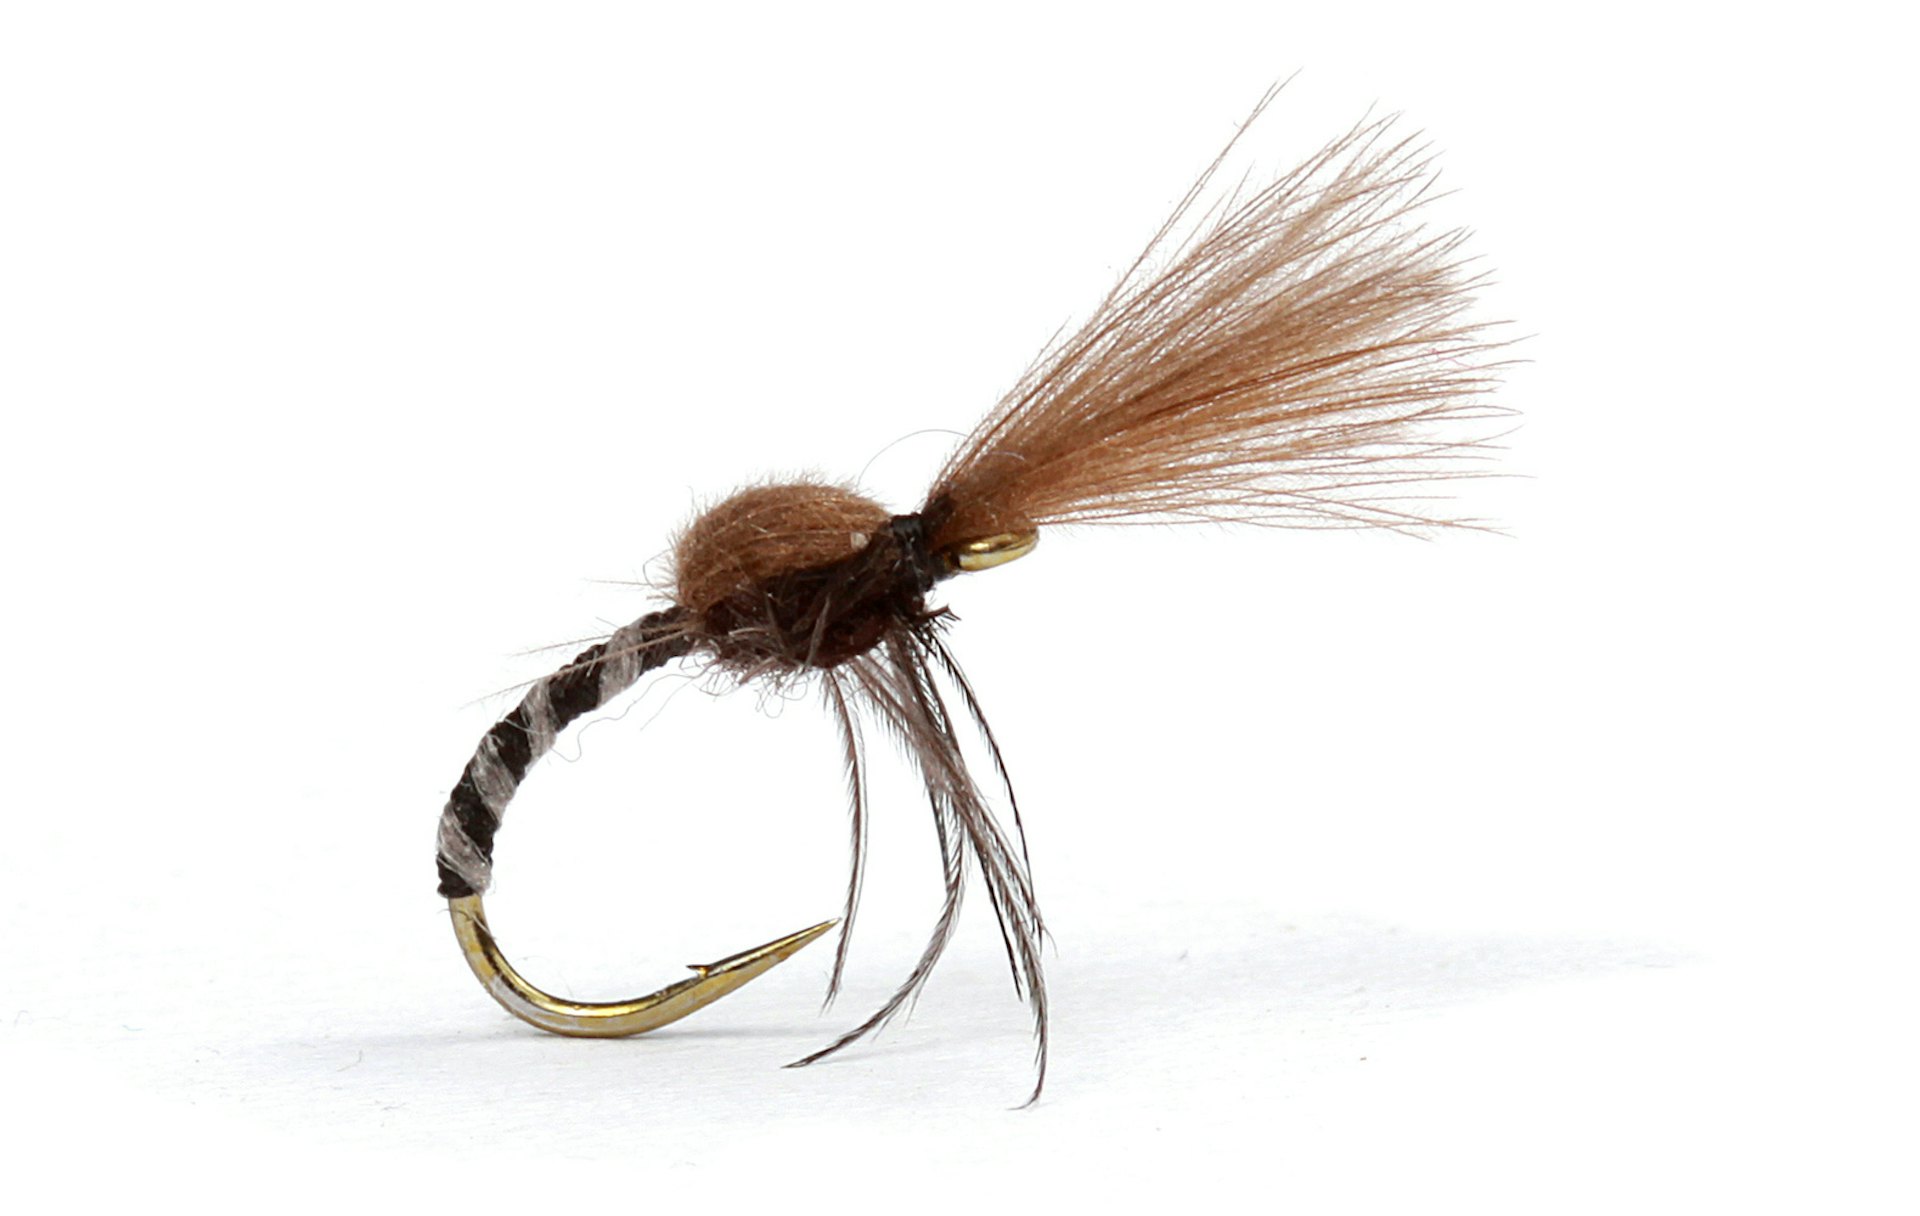 Trout Fishing Flies stock image. Image of fish, feathers - 57052681